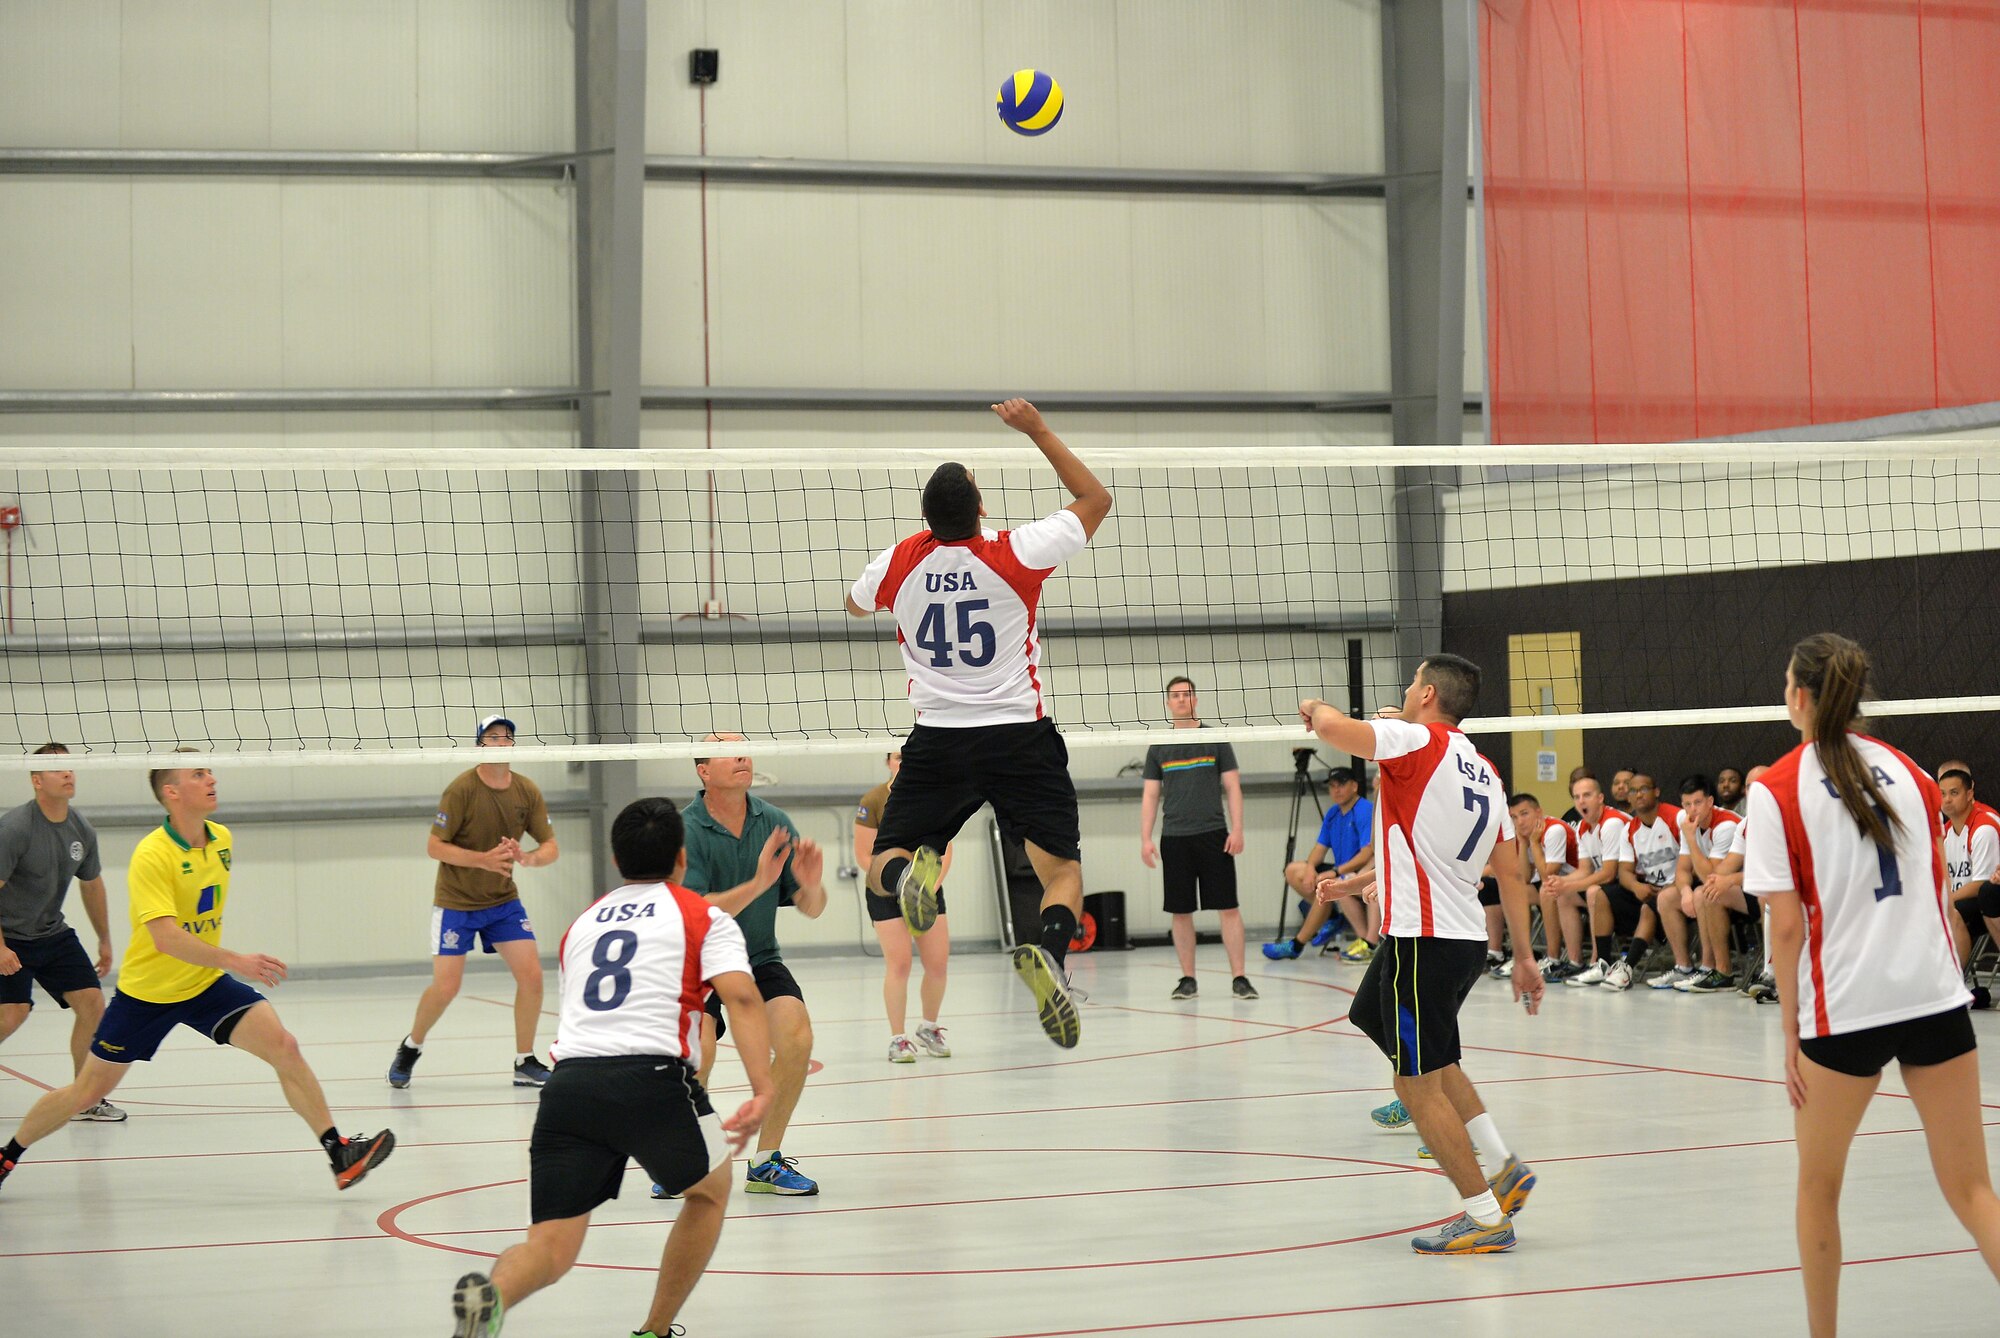 The U.S. plays team Australia in the opening volleyball match of the Friendship Games at an undisclosed location in Southwest Asia May 27, 2015. The tri-sport event is held every two months. In this installment of the games, teams went head-to-head in a 5K run, volleyball and tug-o-war. (U.S. Air Force photo/ Tech. Sgt. Jeff Andrejcik)